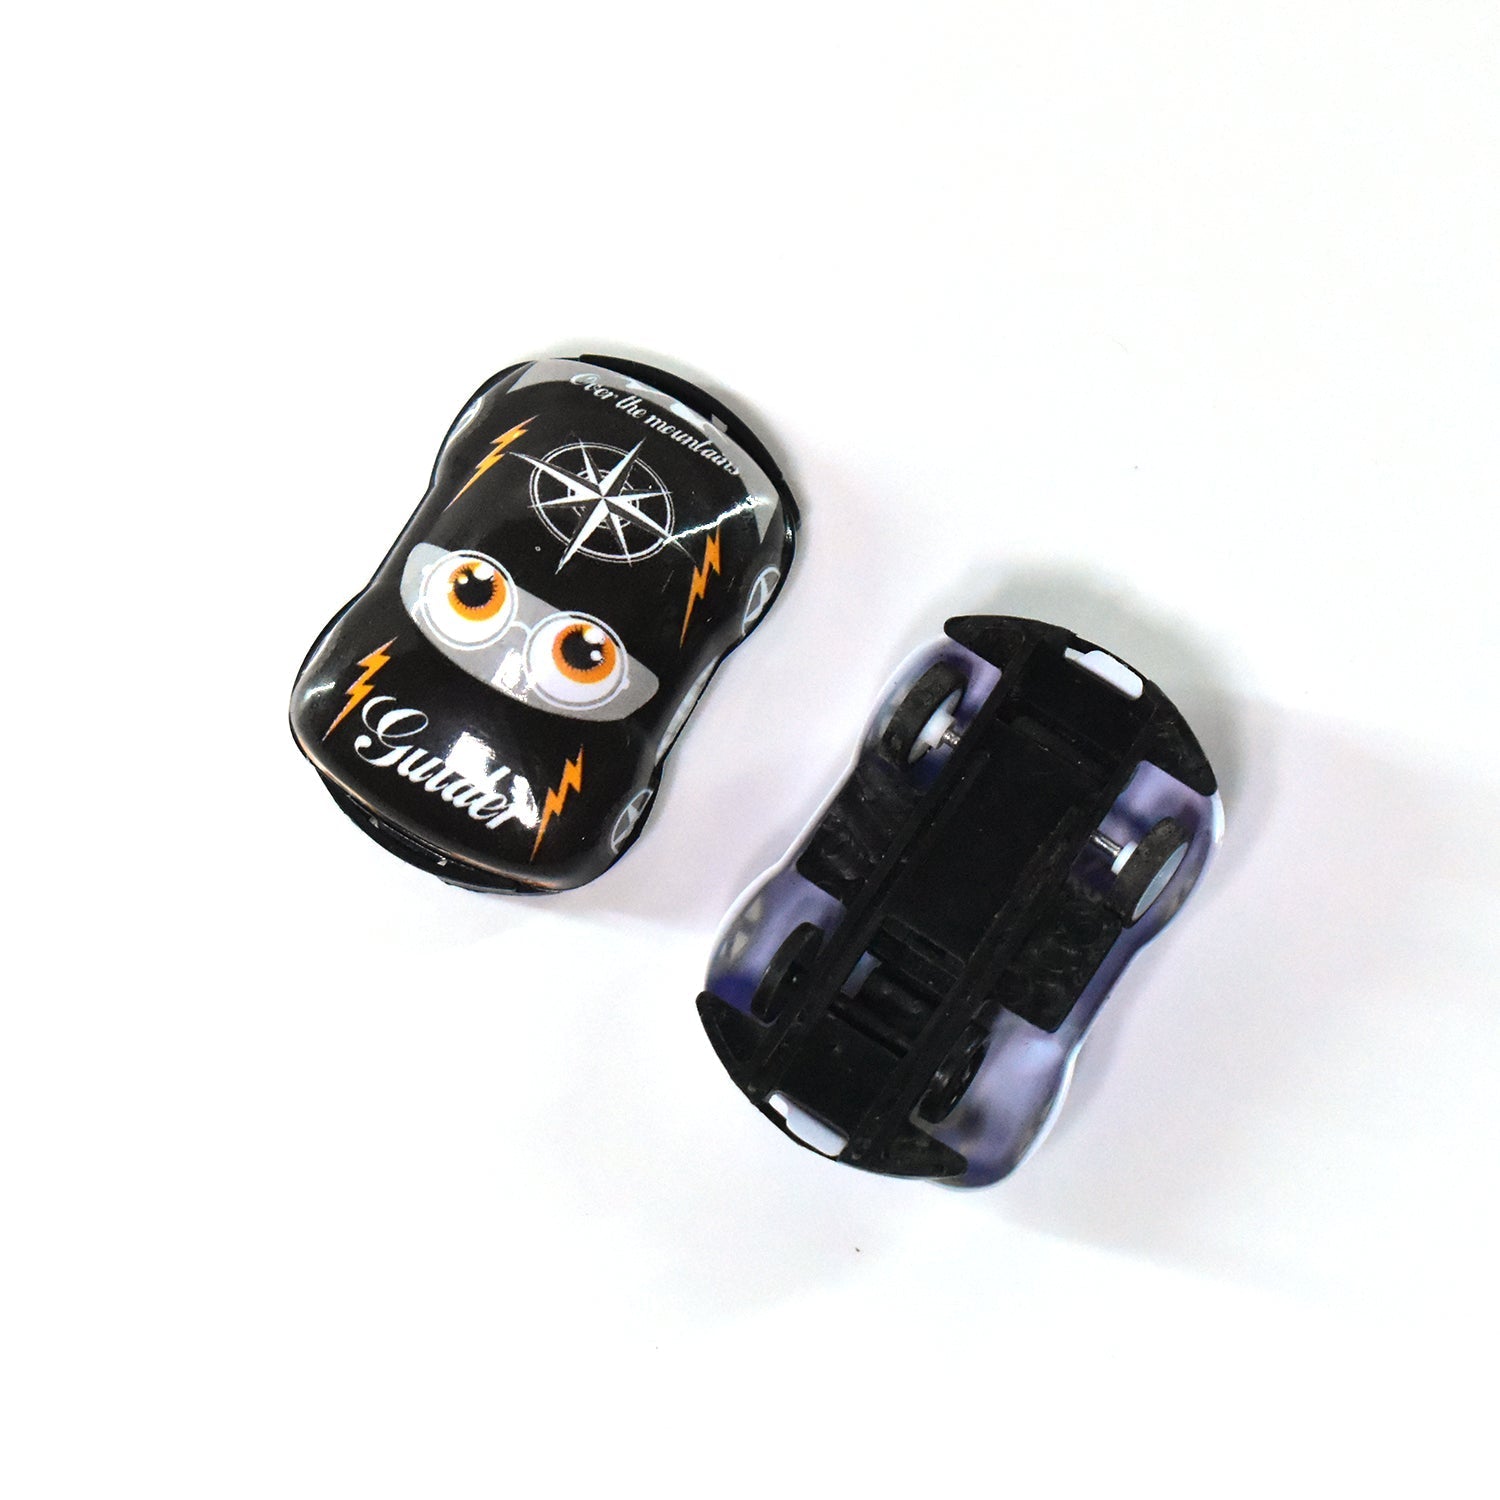 8074A 30 Pc Mini Pull Back Car Widely Used By Kids And Children’s For Playing Purposes. DeoDap